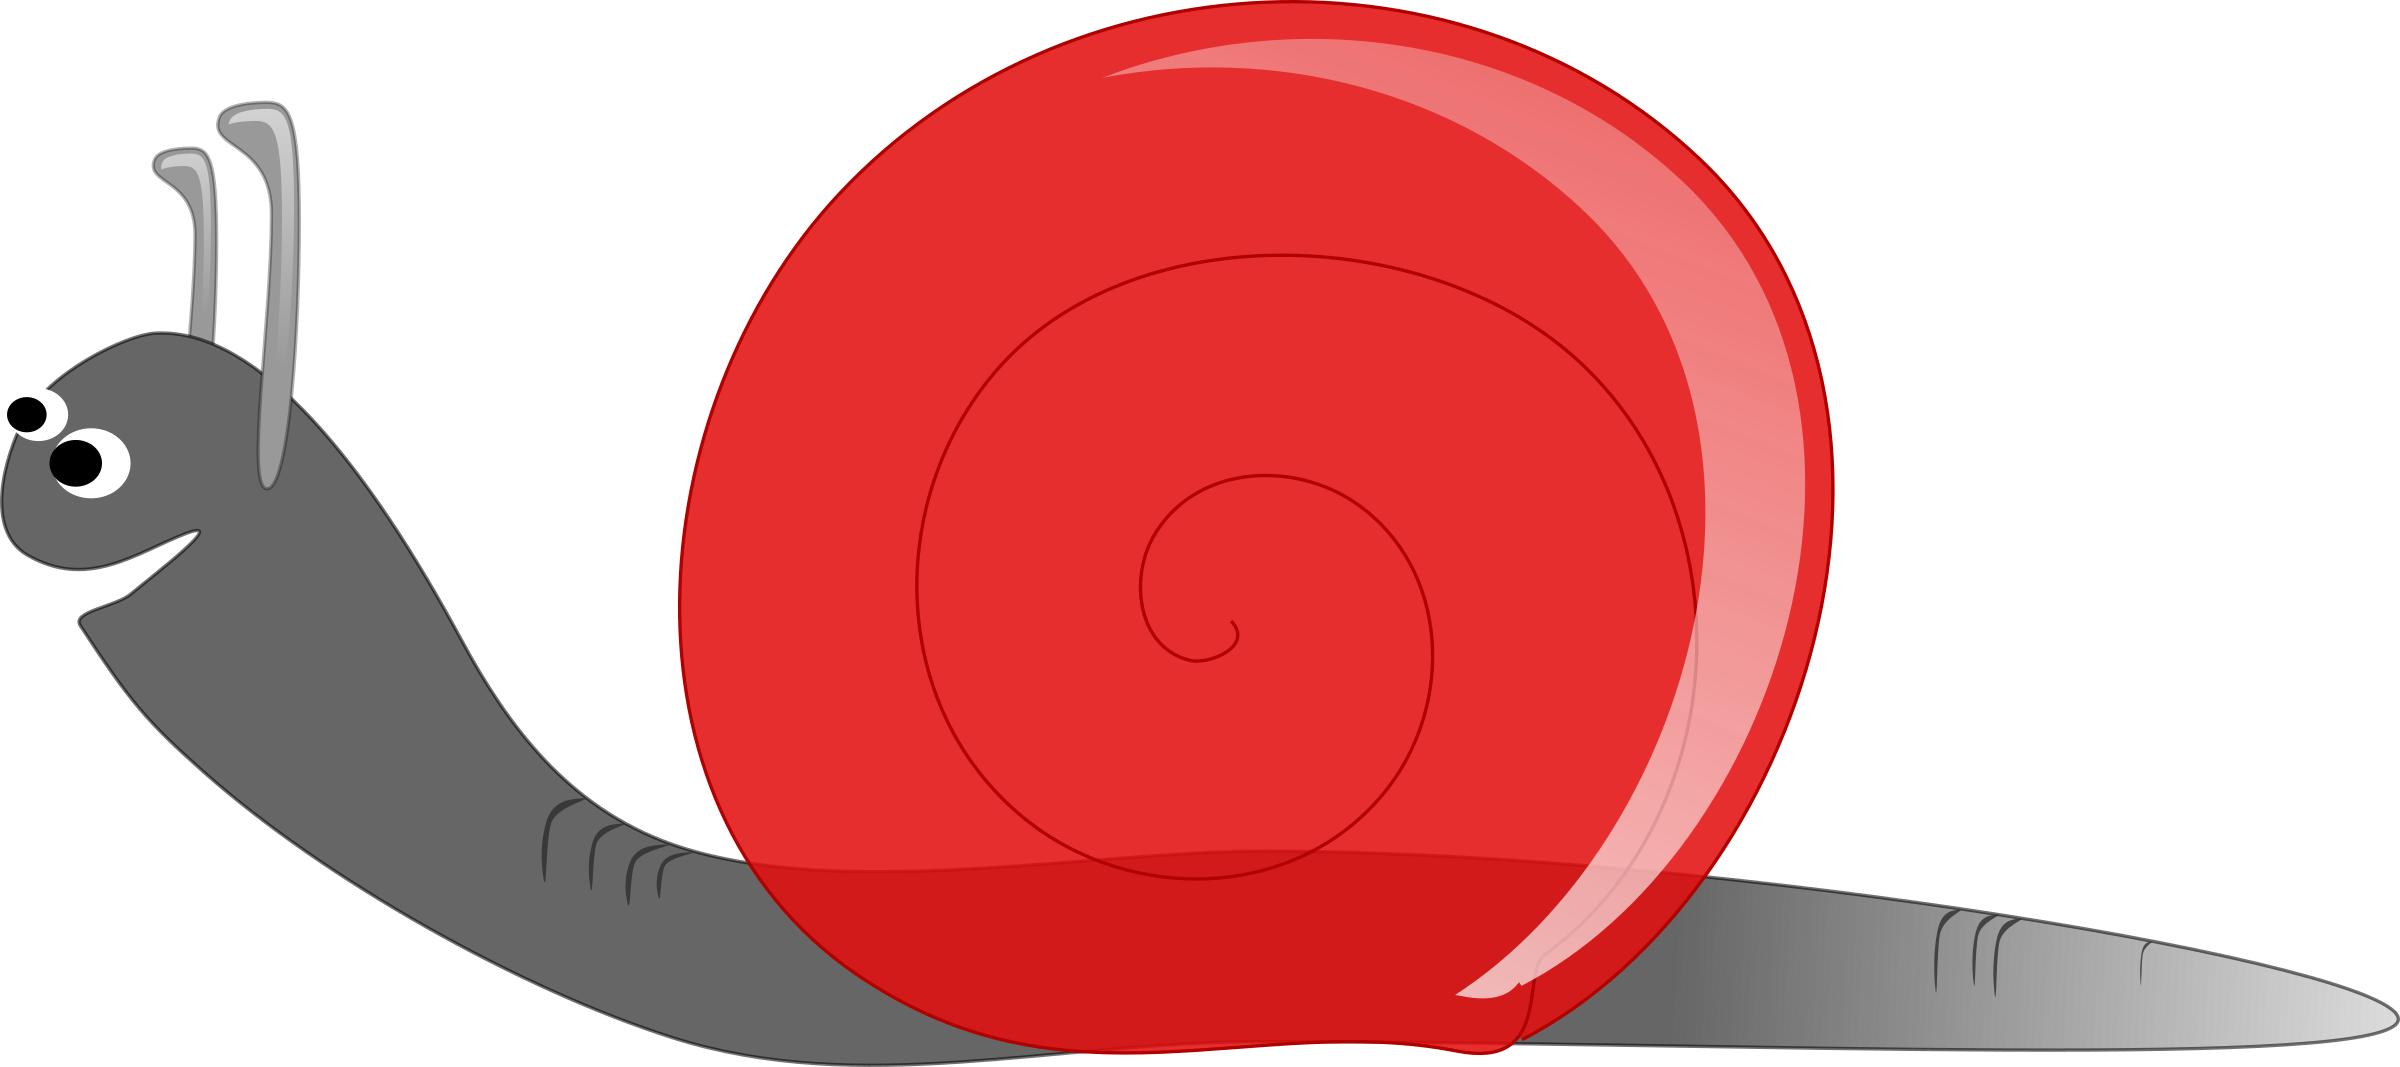 Caracol / Snail png